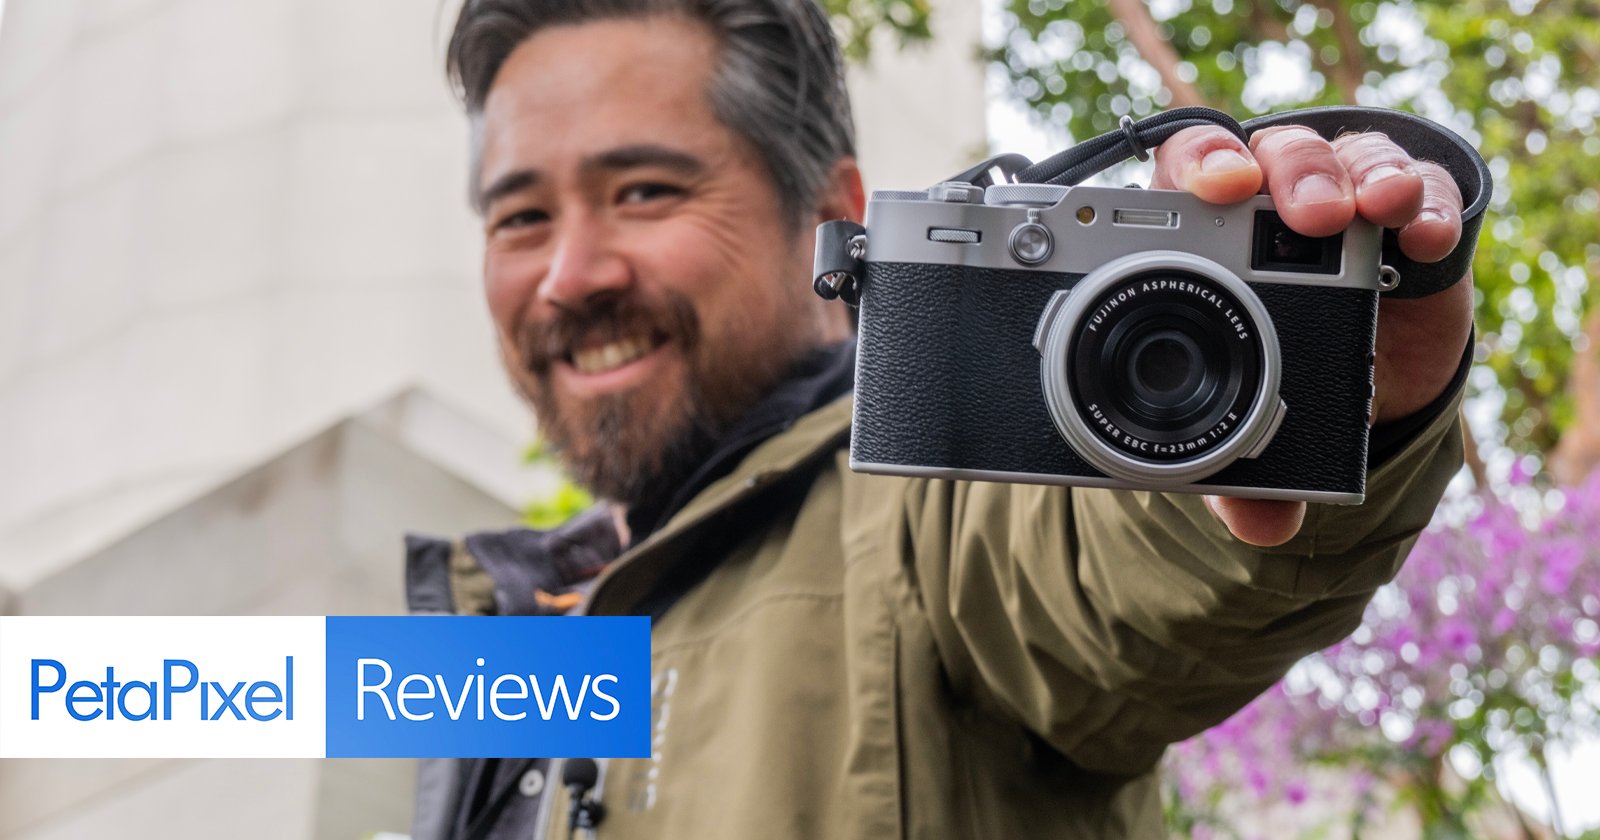 A smiling man holding a camera in front of him, focused on the lens, with petapixel reviews overlay text, in a garden setting.